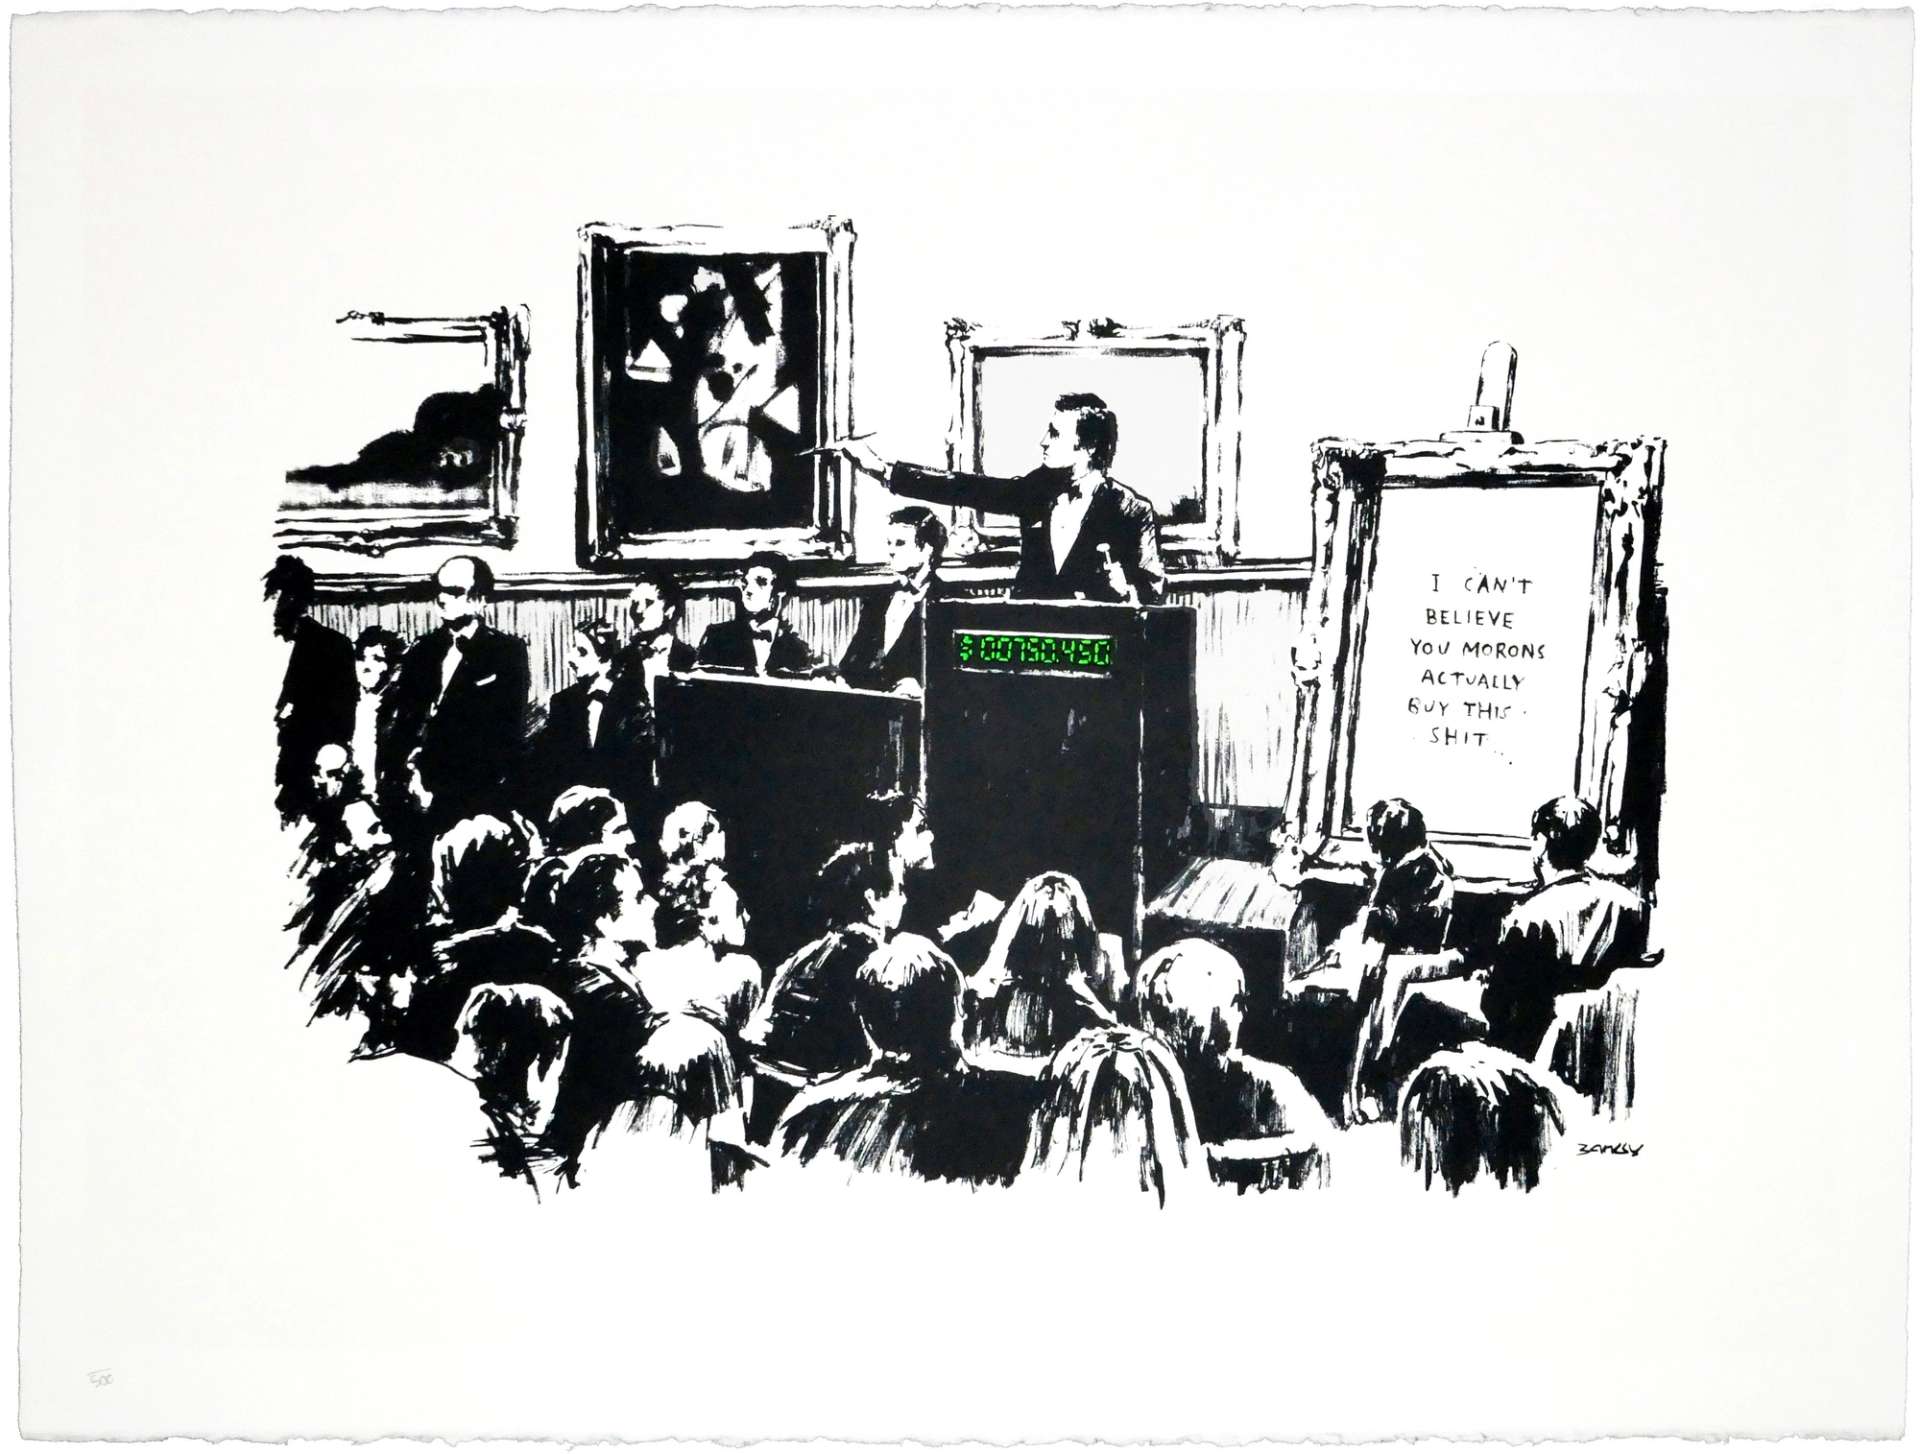 A black and white screenprint by Banksy depicting a scene at an auction house, with an artwork in the background containing the words: “I CAN'T BELIEVE YOU MORONS ACTUALLY BUY THIS SHIT”.